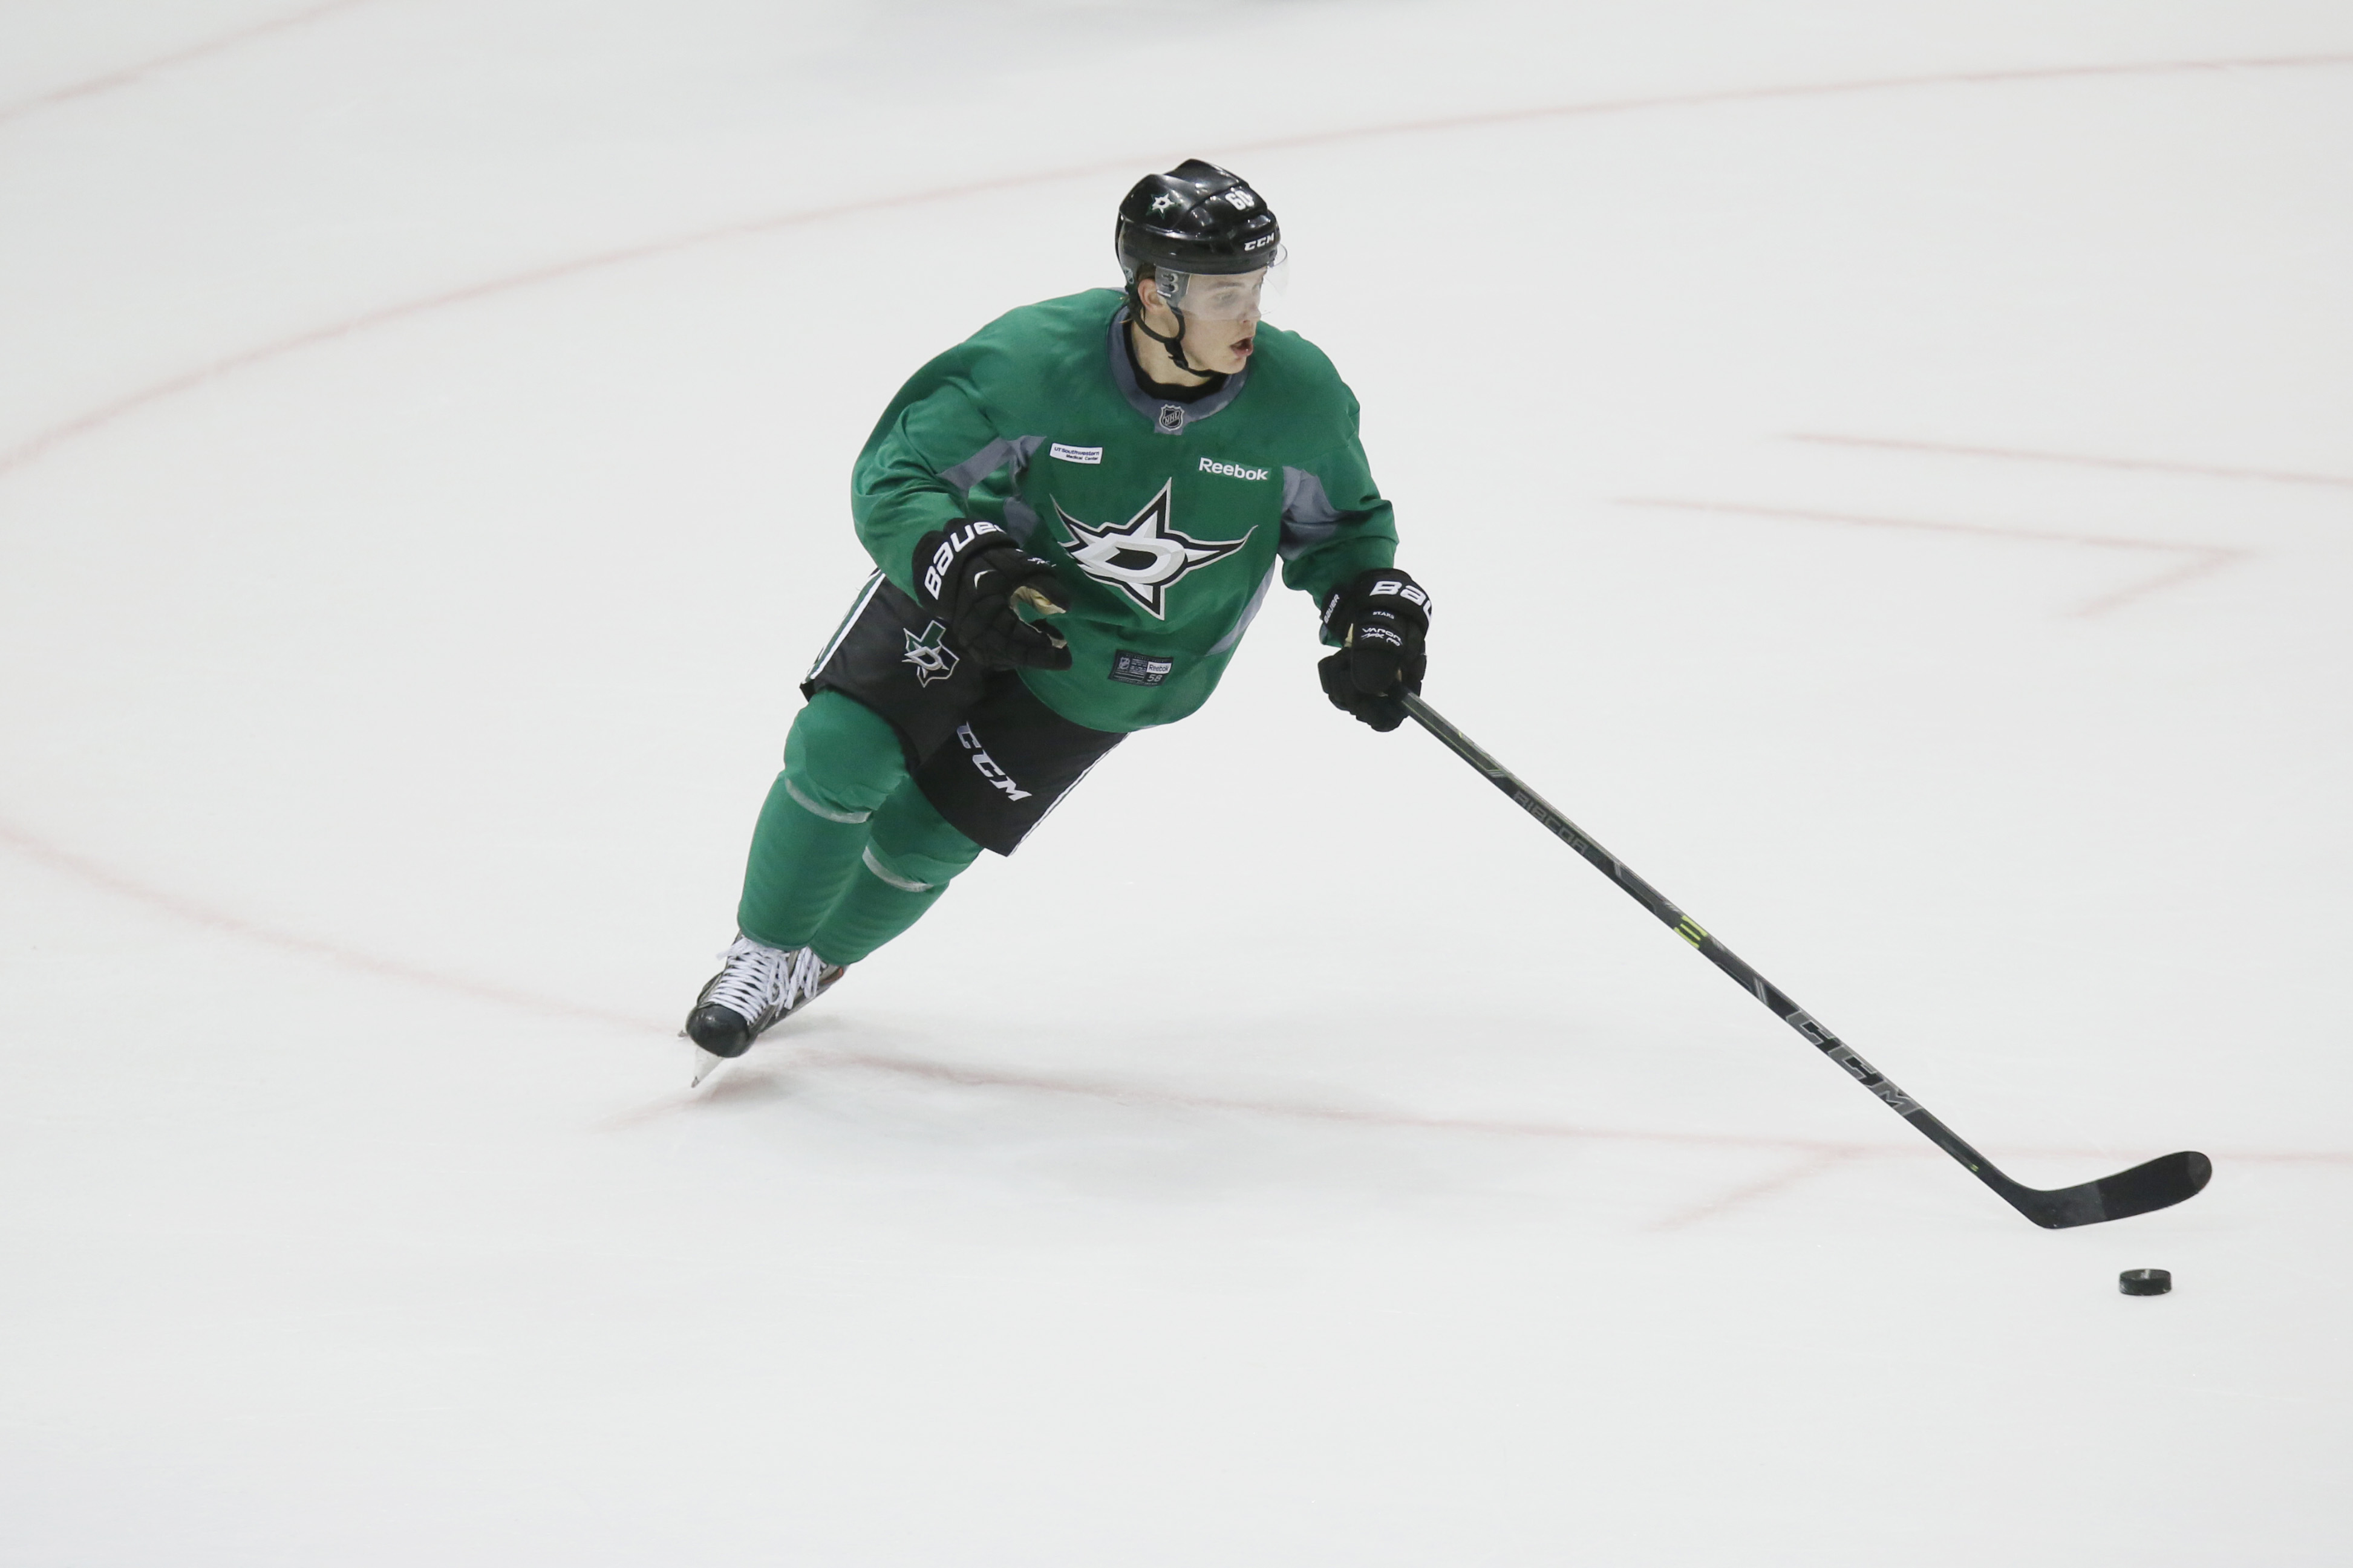 Neil Graham is back to hockey as usual in his role as Texas Stars